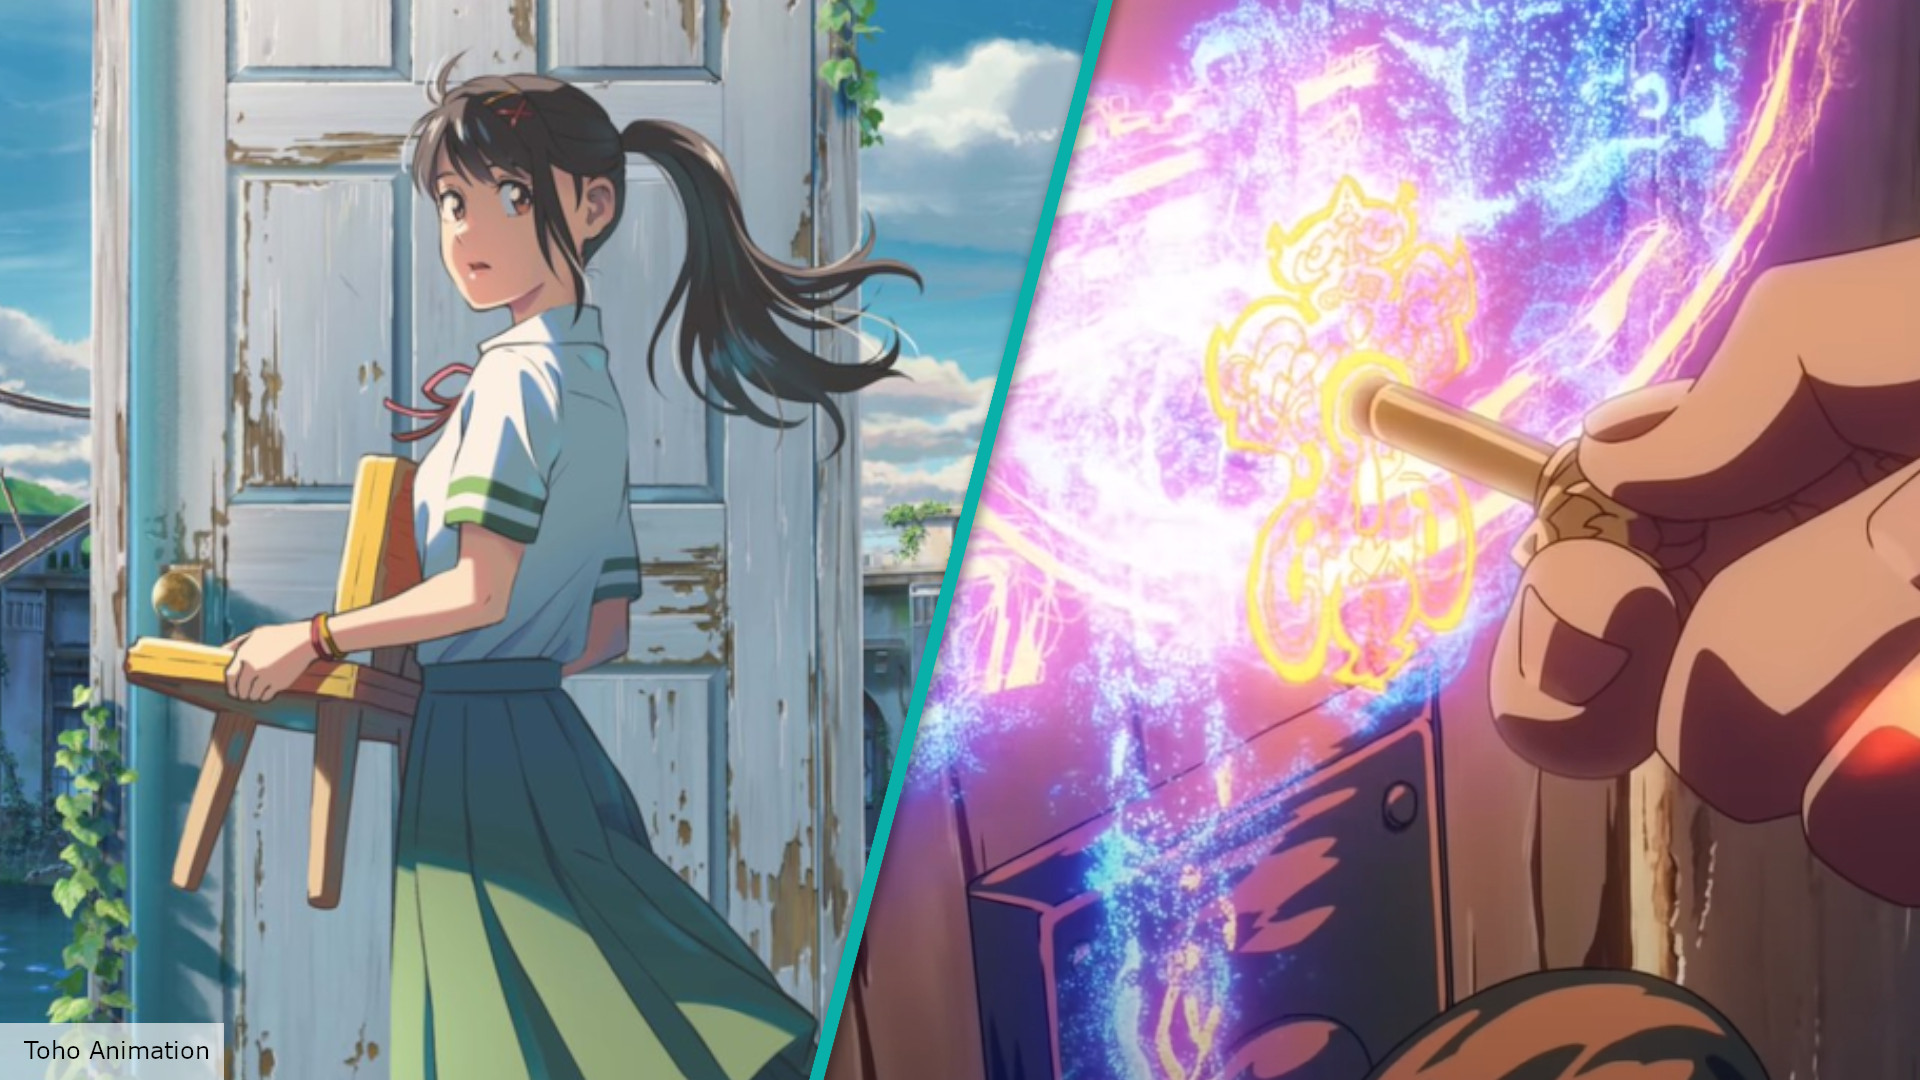 Suzume no Tojimari Trailer Shows a New Story From Your Name Director